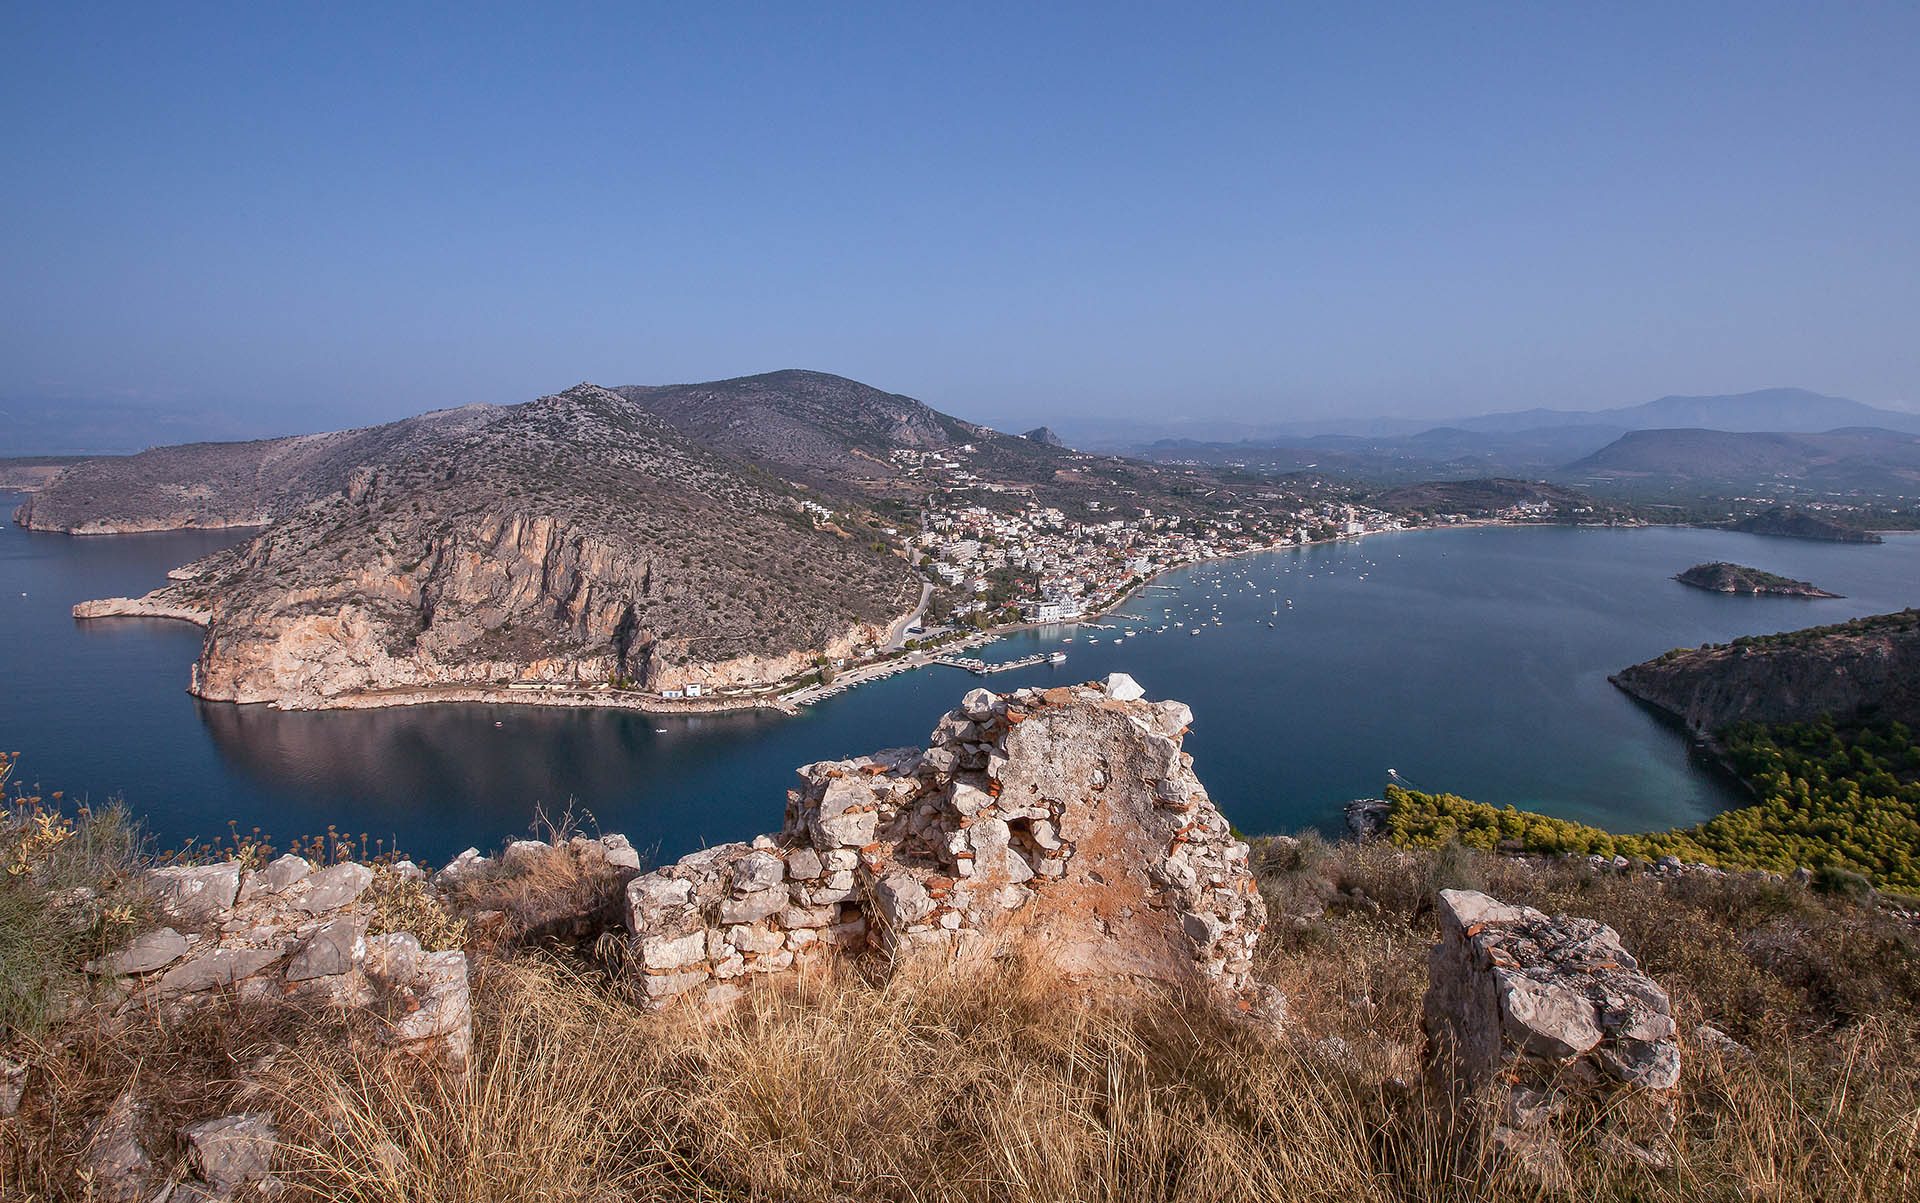 Travel is great- Tolo is one of the pearls of the Greek mainland